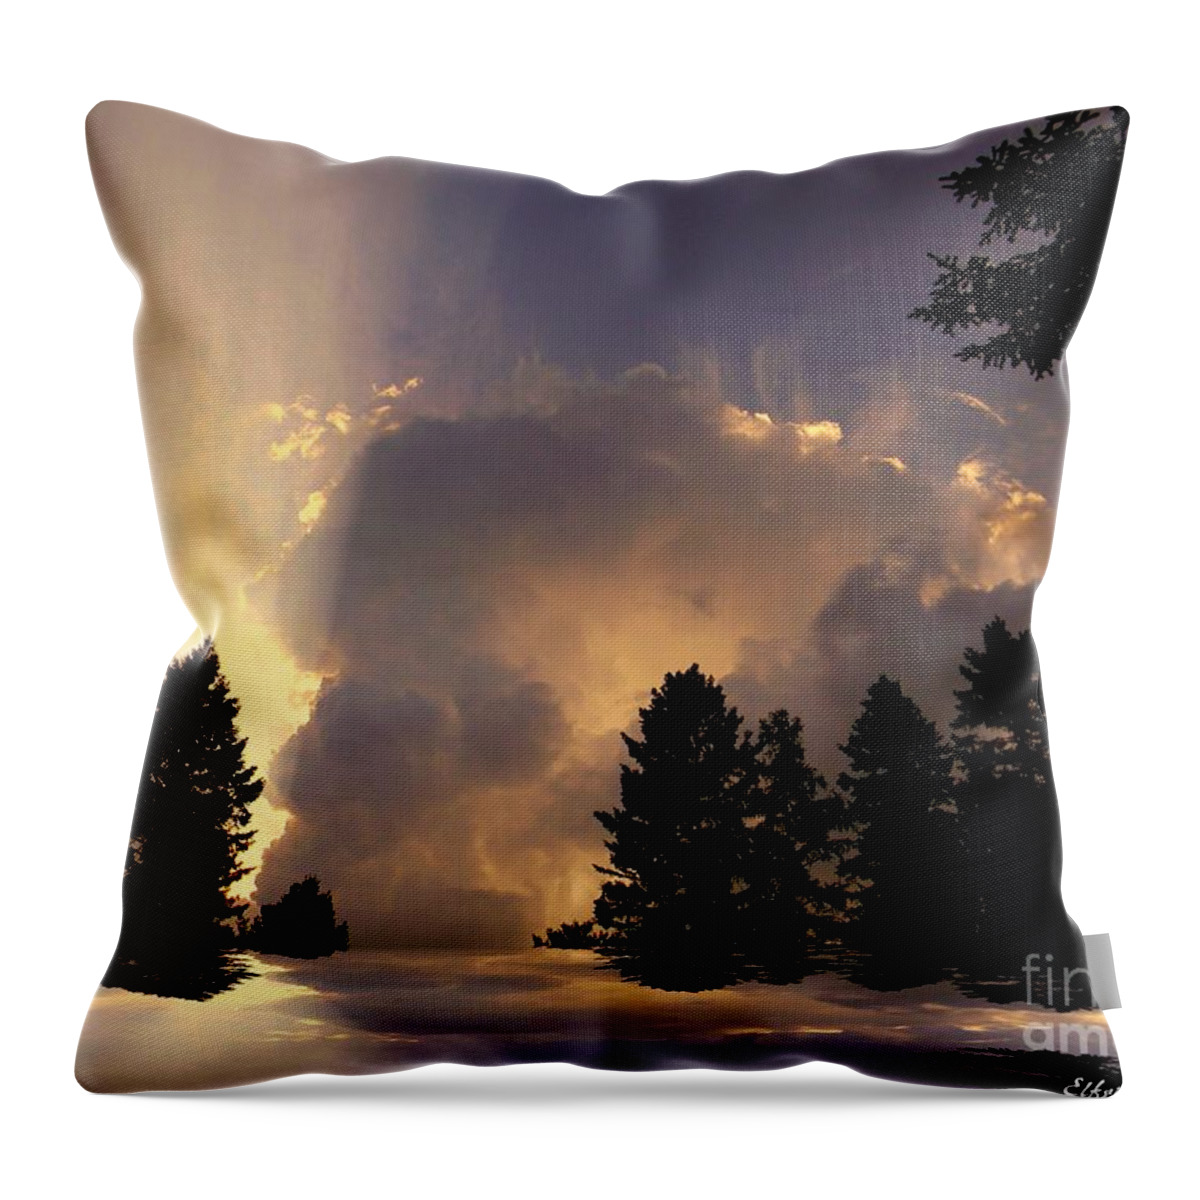 Clouds Throw Pillow featuring the photograph The Cloud by Elfriede Fulda